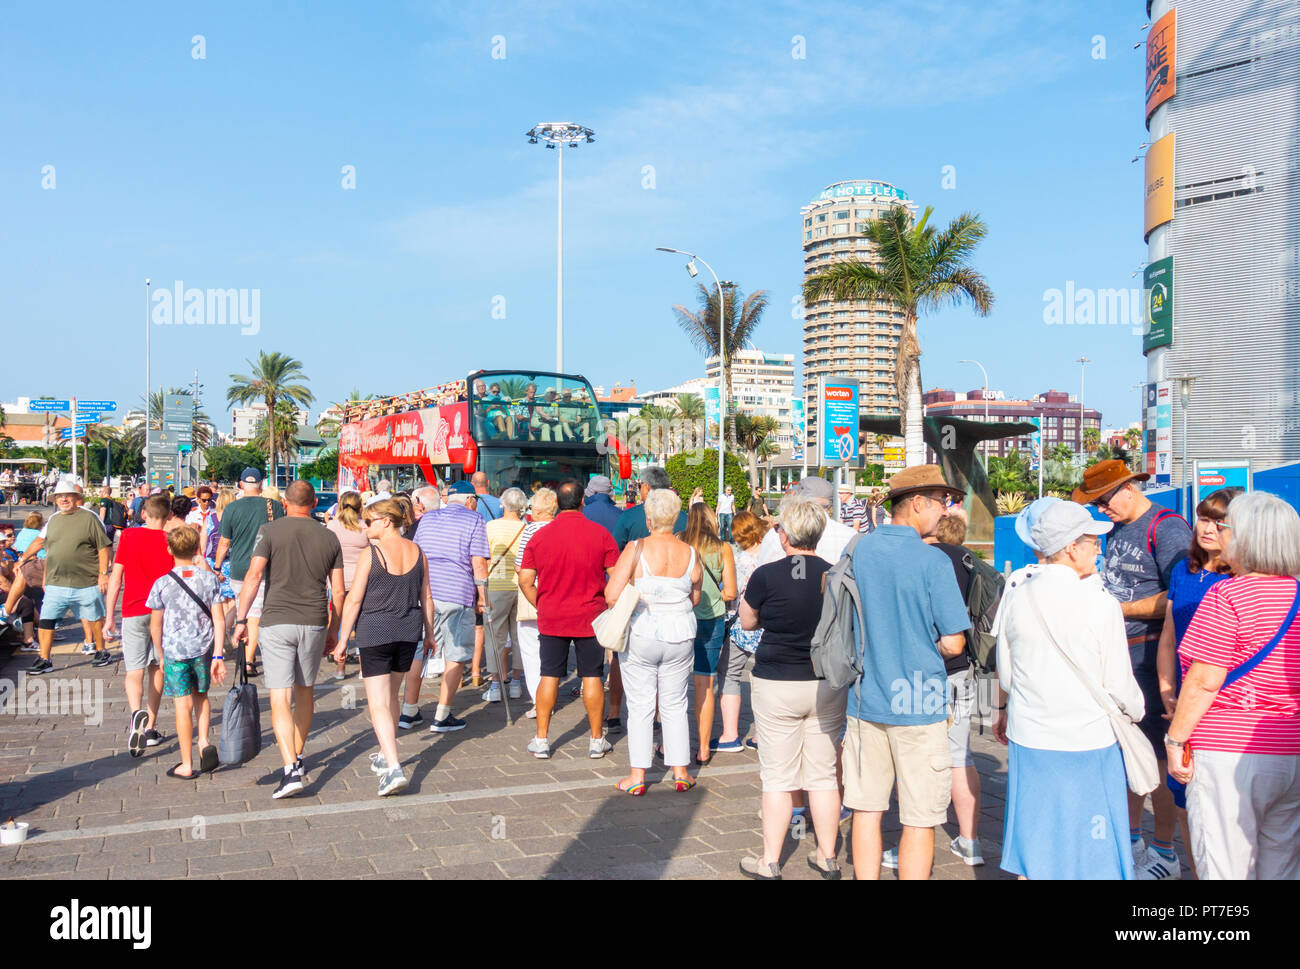 Las Palmas, Gran Canaria, Canary Islands, Spain. 7th October 2018. Weather:  Cruise ship passengers queue to board a city sightseeing bus in Las Palmas  as three large cruise ships with around 10,000